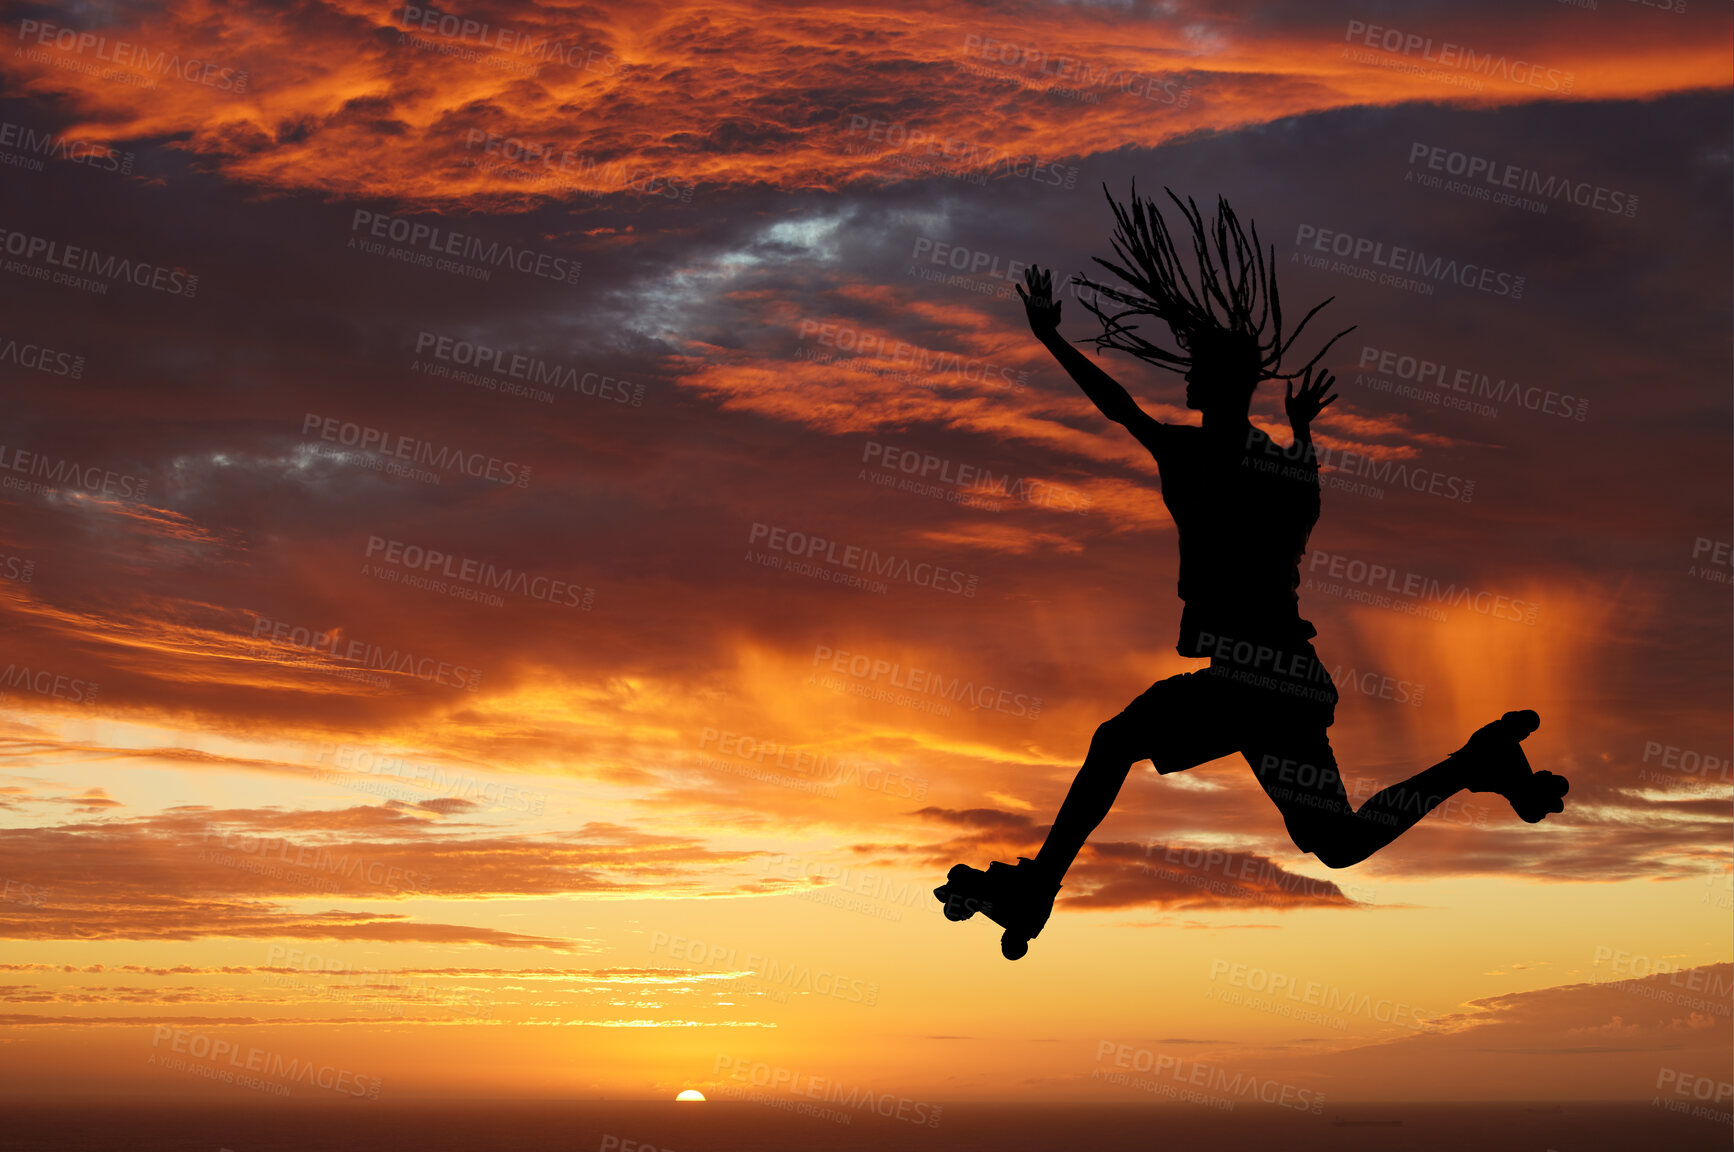 Buy stock photo Sunset sky, silhouette and roller skates woman jumping against an orange horizon while enjoying freedom, travel and fun while skating. Energy, scenery and beauty of nature while out on an adventure